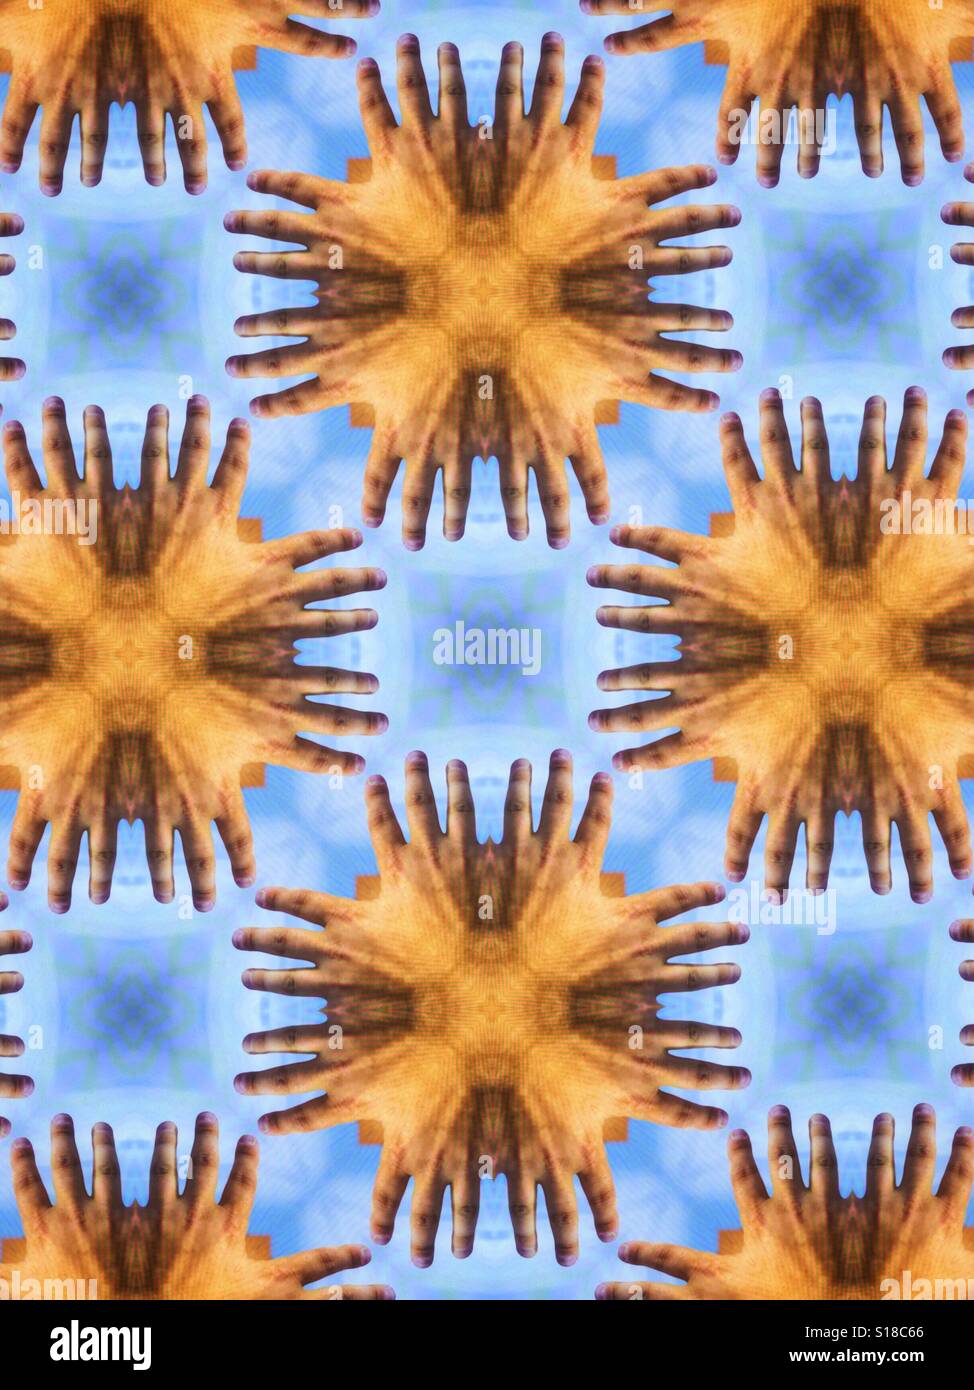 An abstract artistic image of a design made from hands and fingers Stock Photo